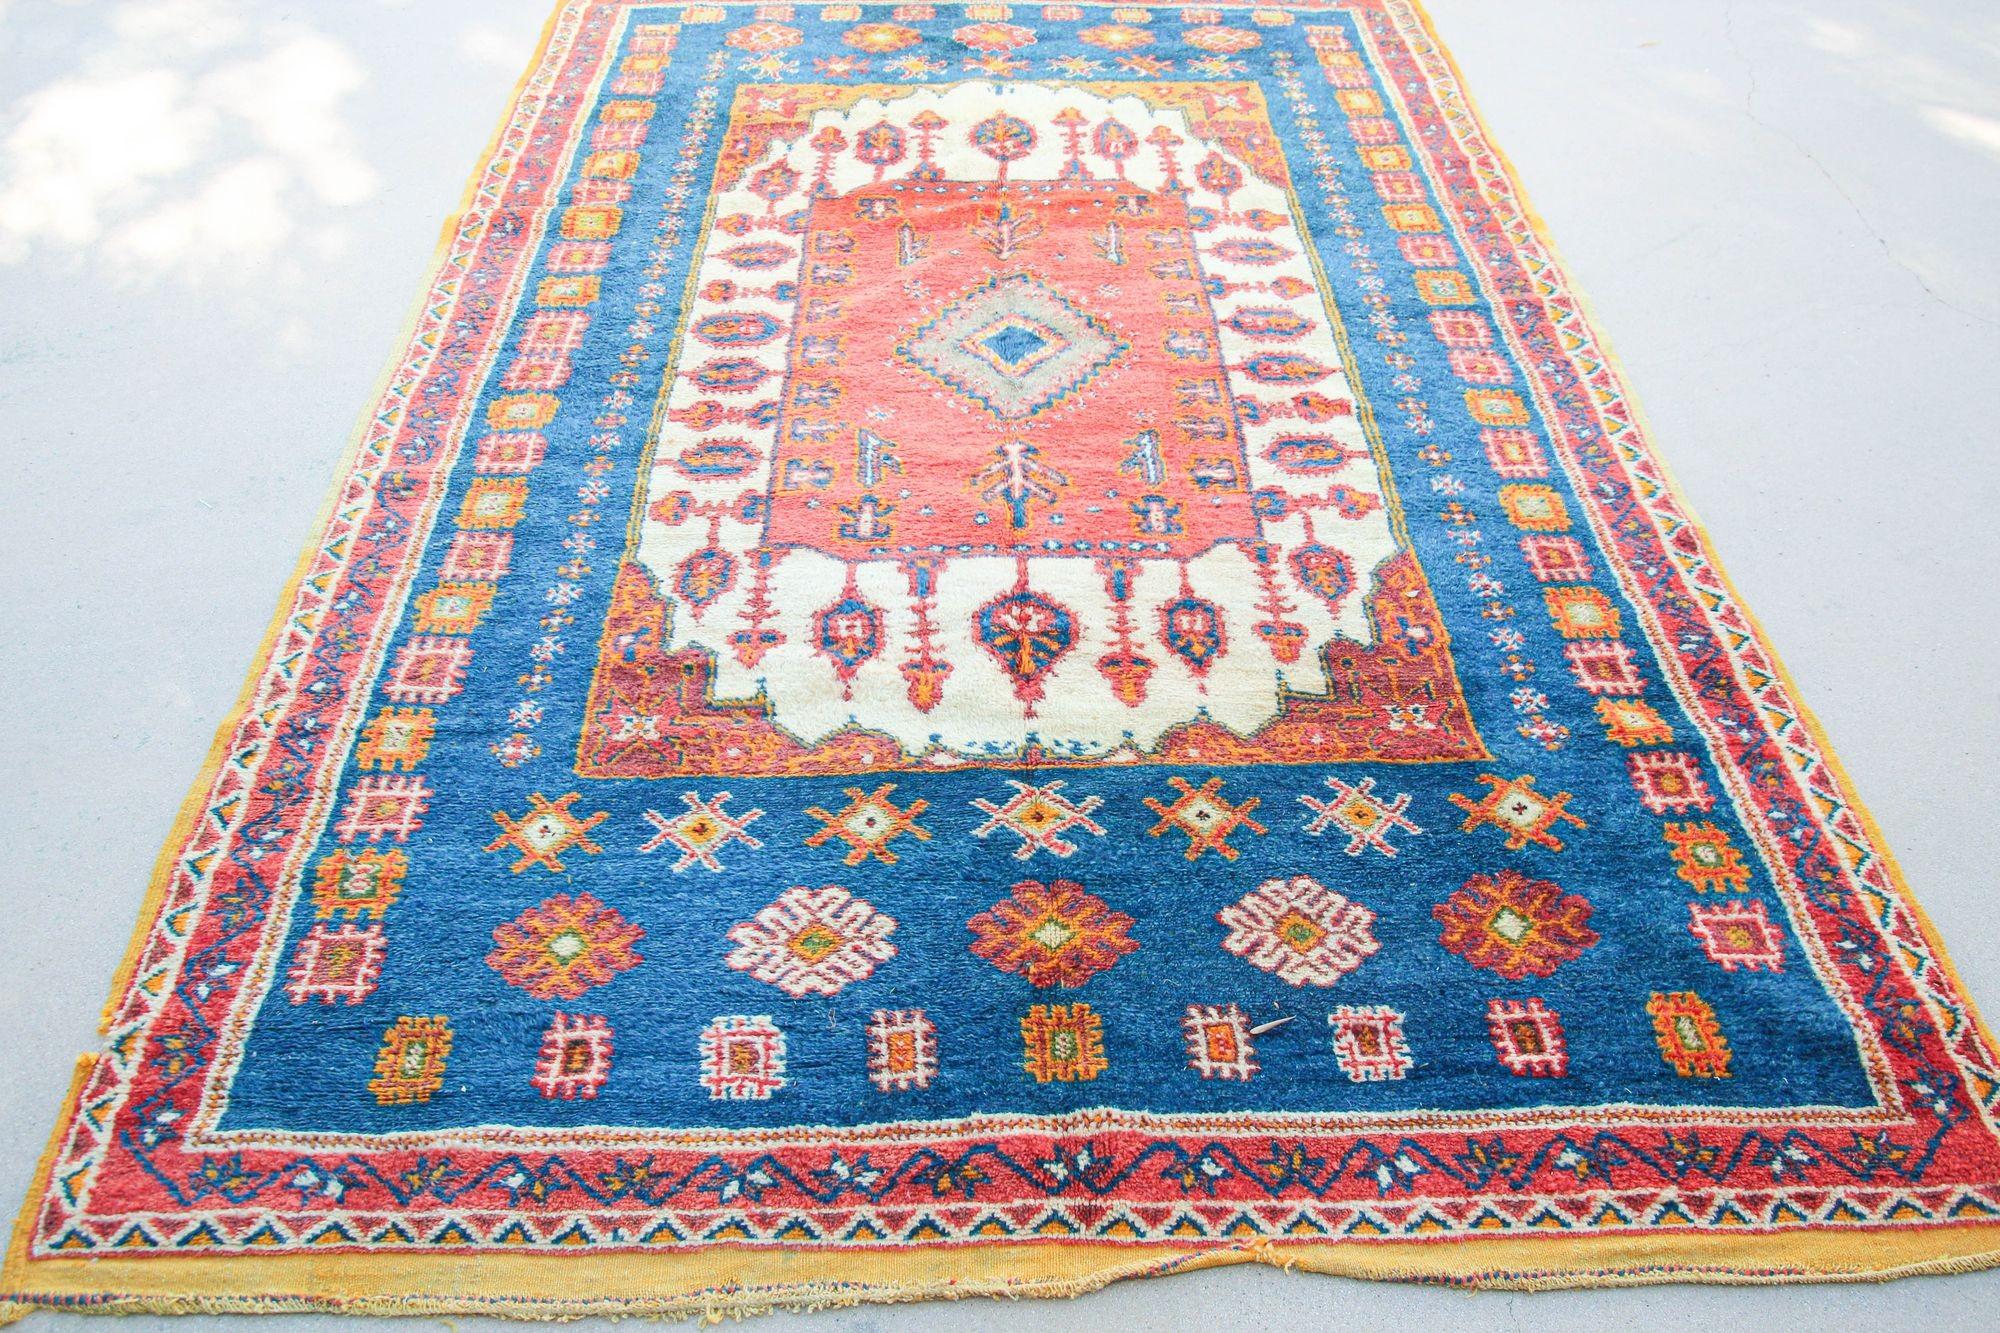 1960s vintage authentic Moroccan Berber Rug in Orange Blue and Pink cors.For centuries the tribal people of Morocco's Atlas Mountains have passed down the delicate art of rug-weaving. In Northern Africa rugs are not only a practical asset to the